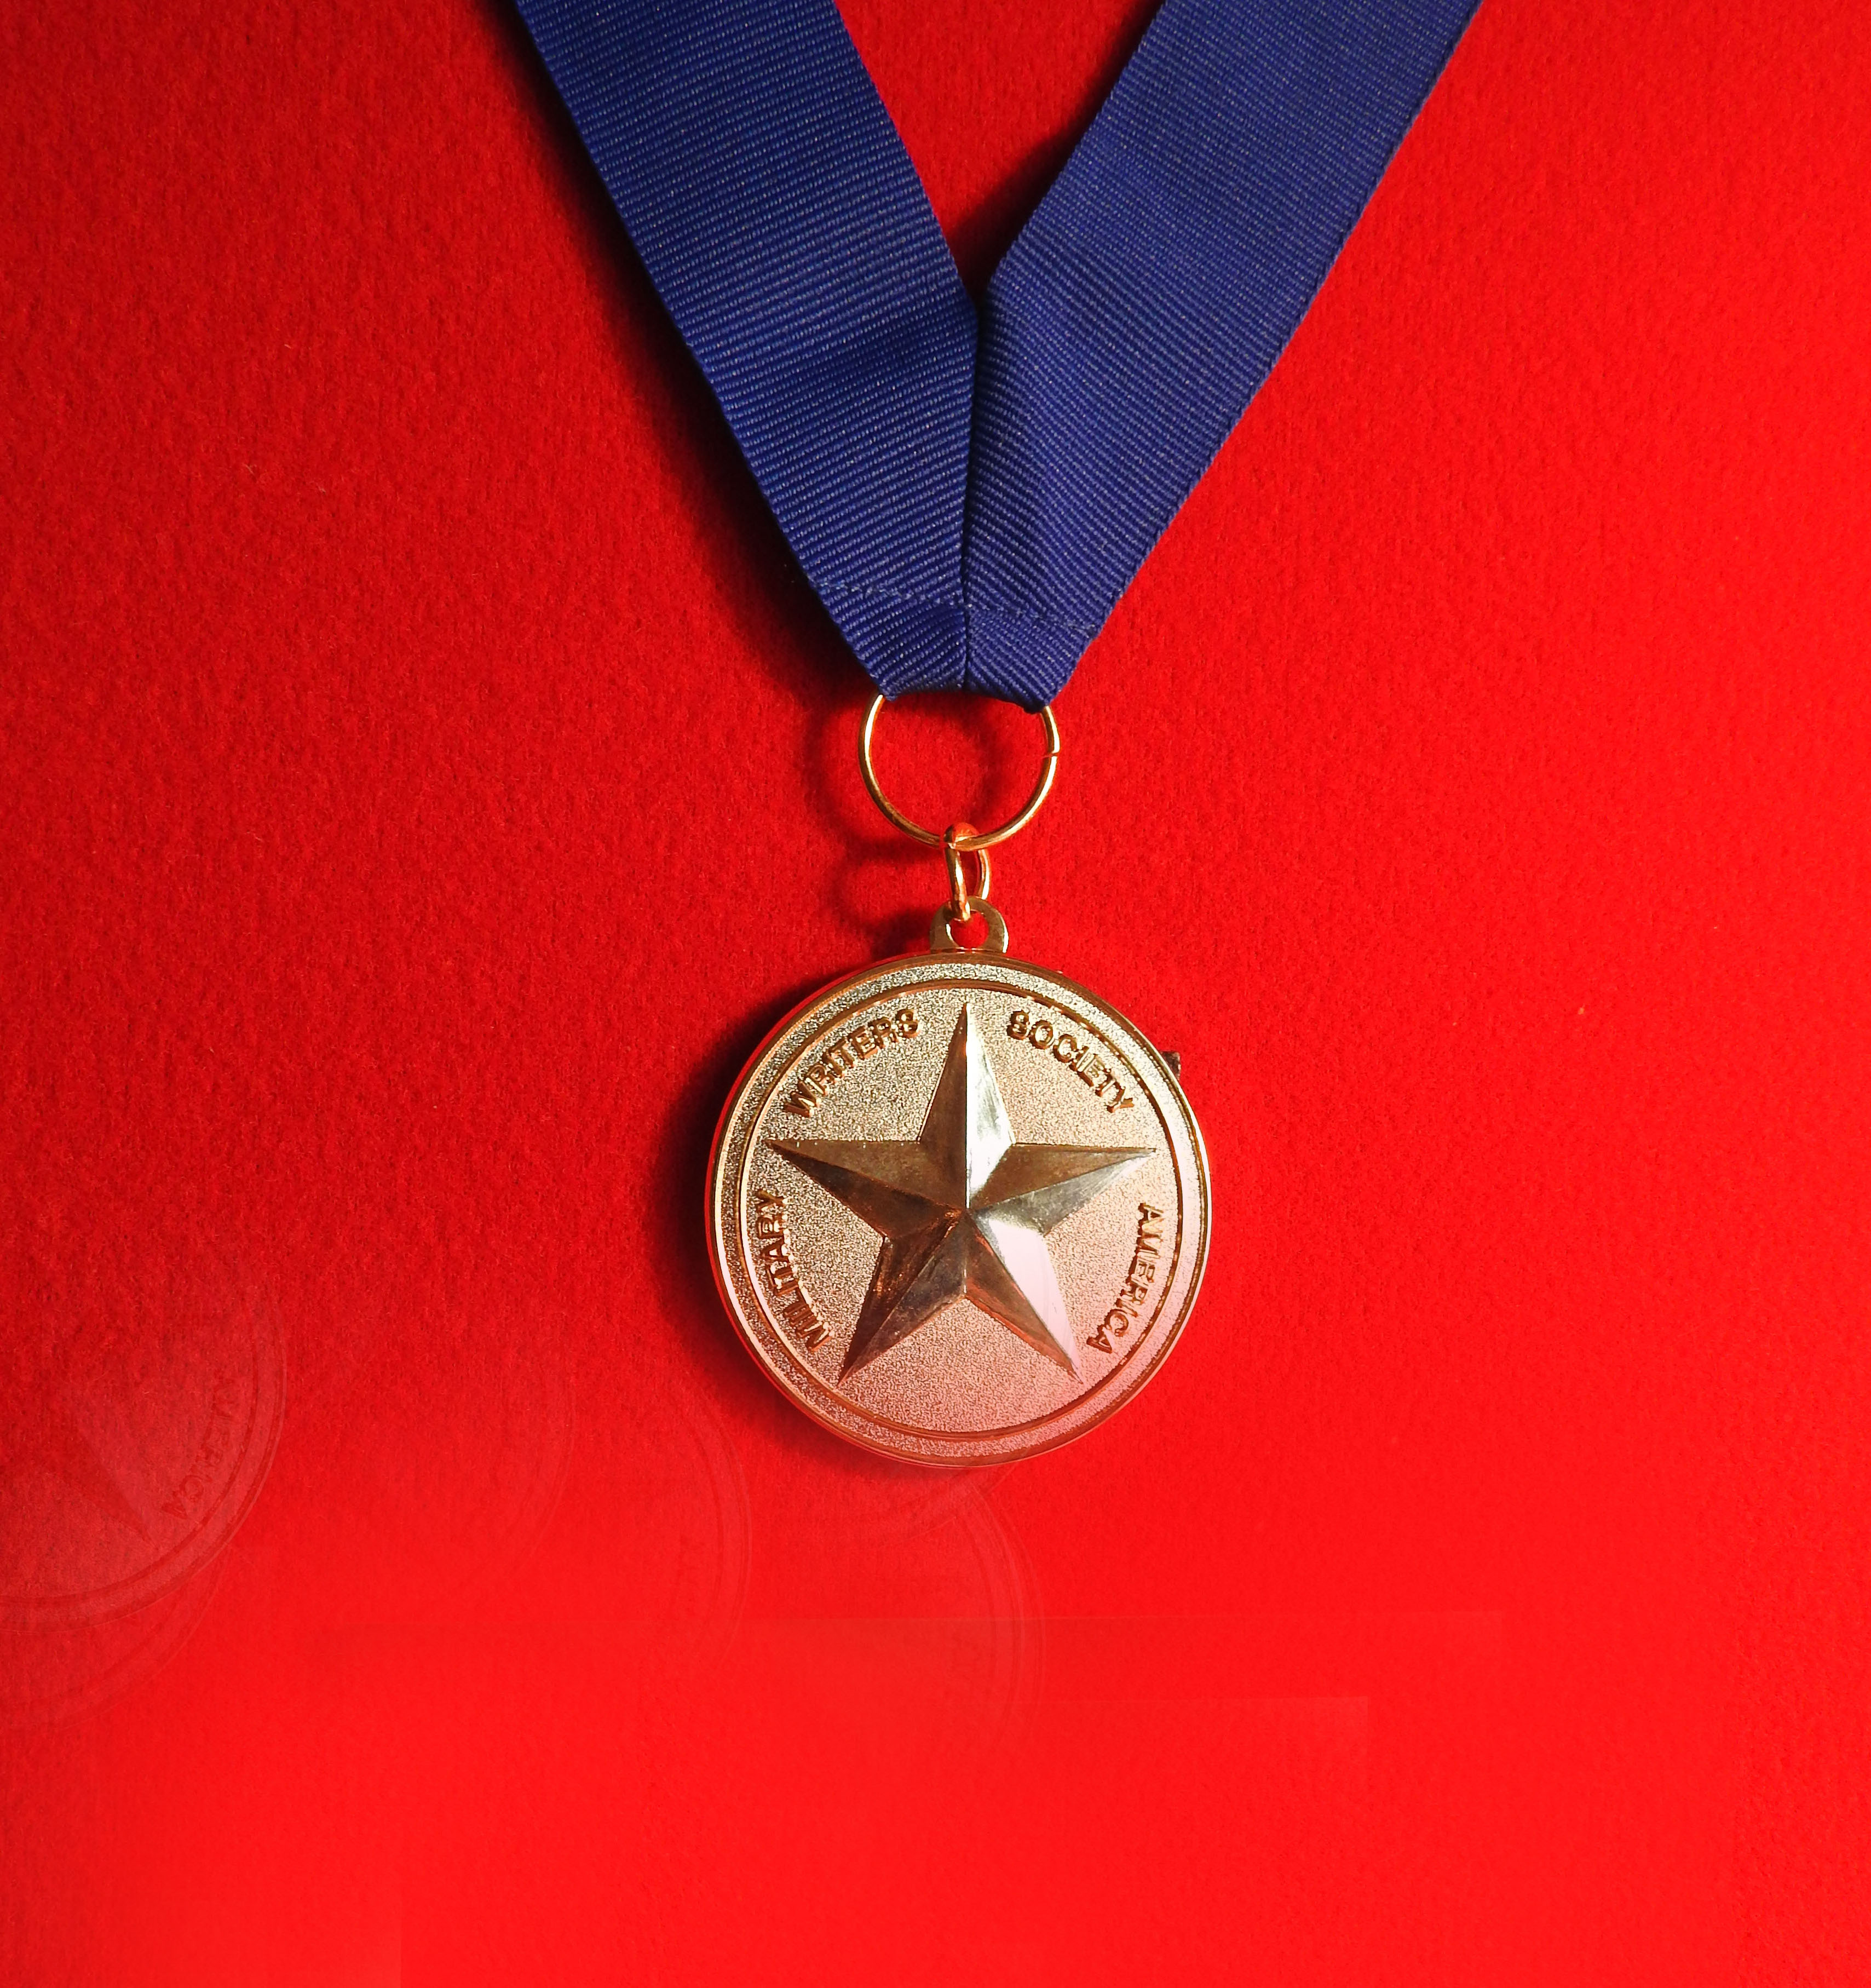 GOLD MEDAL - Historical Fiction - 2015, Military Writers Society of America.